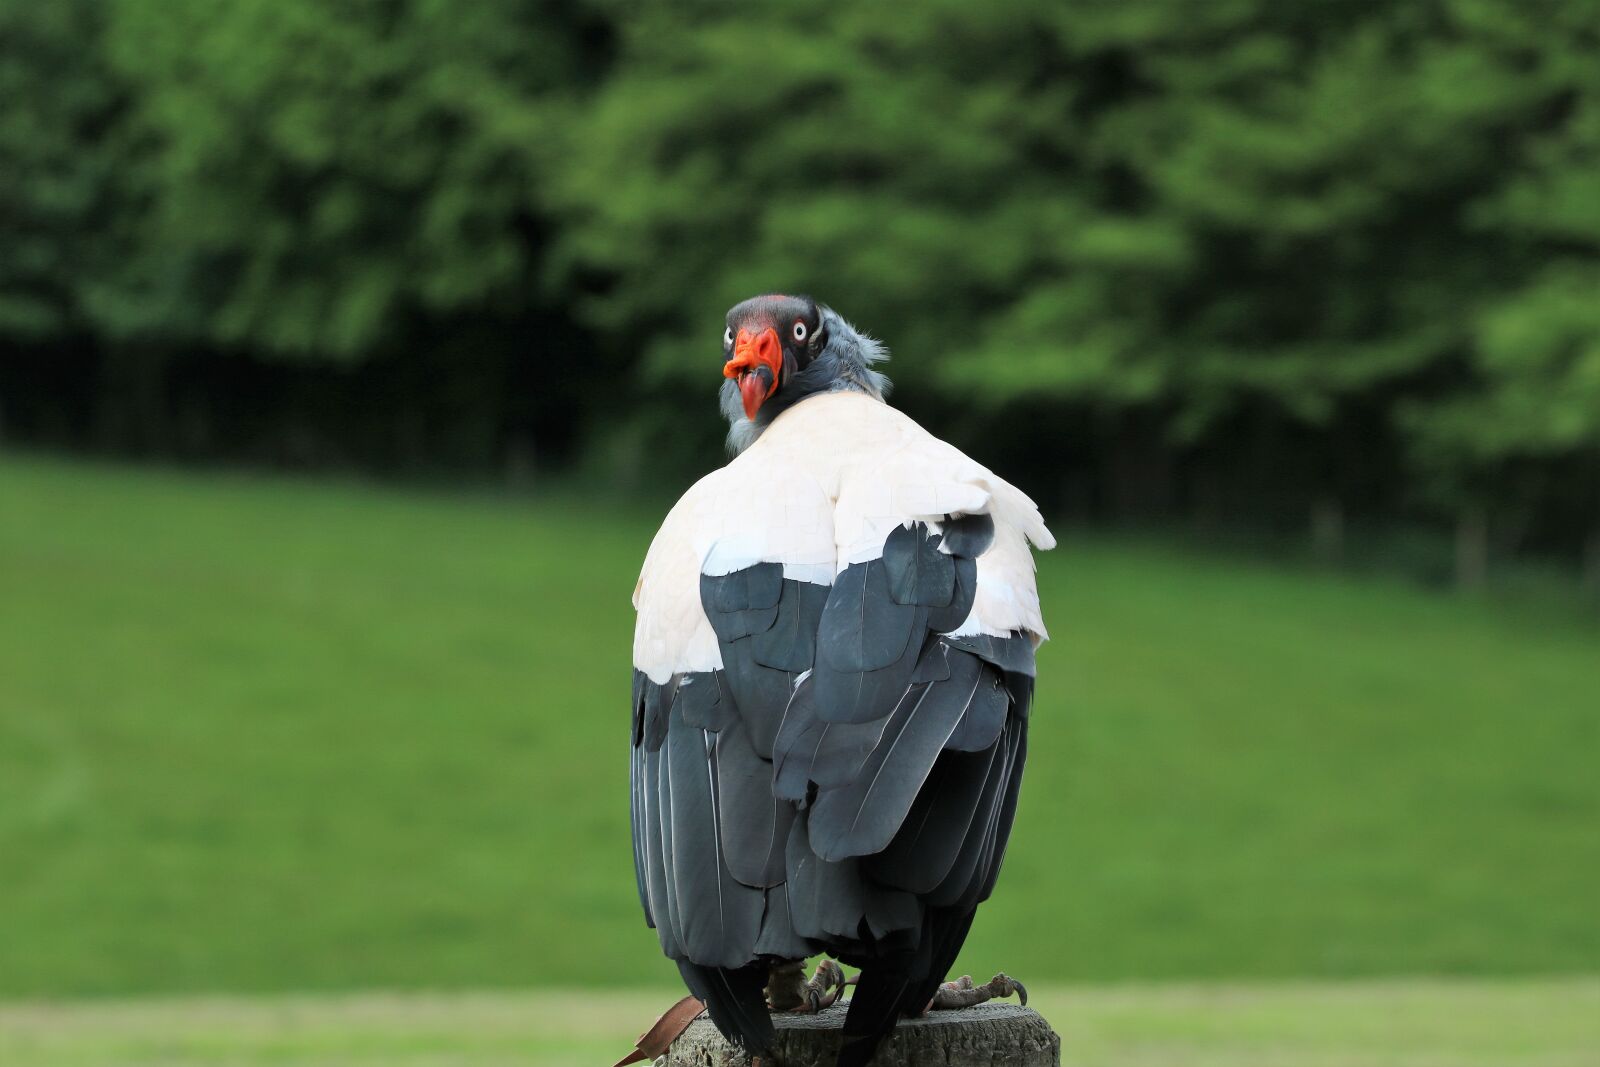 Canon EOS 760D (EOS Rebel T6s / EOS 8000D) + 150-600mm F5-6.3 DG OS HSM | Contemporary 015 sample photo. King vulture, vulture, wildlife photography